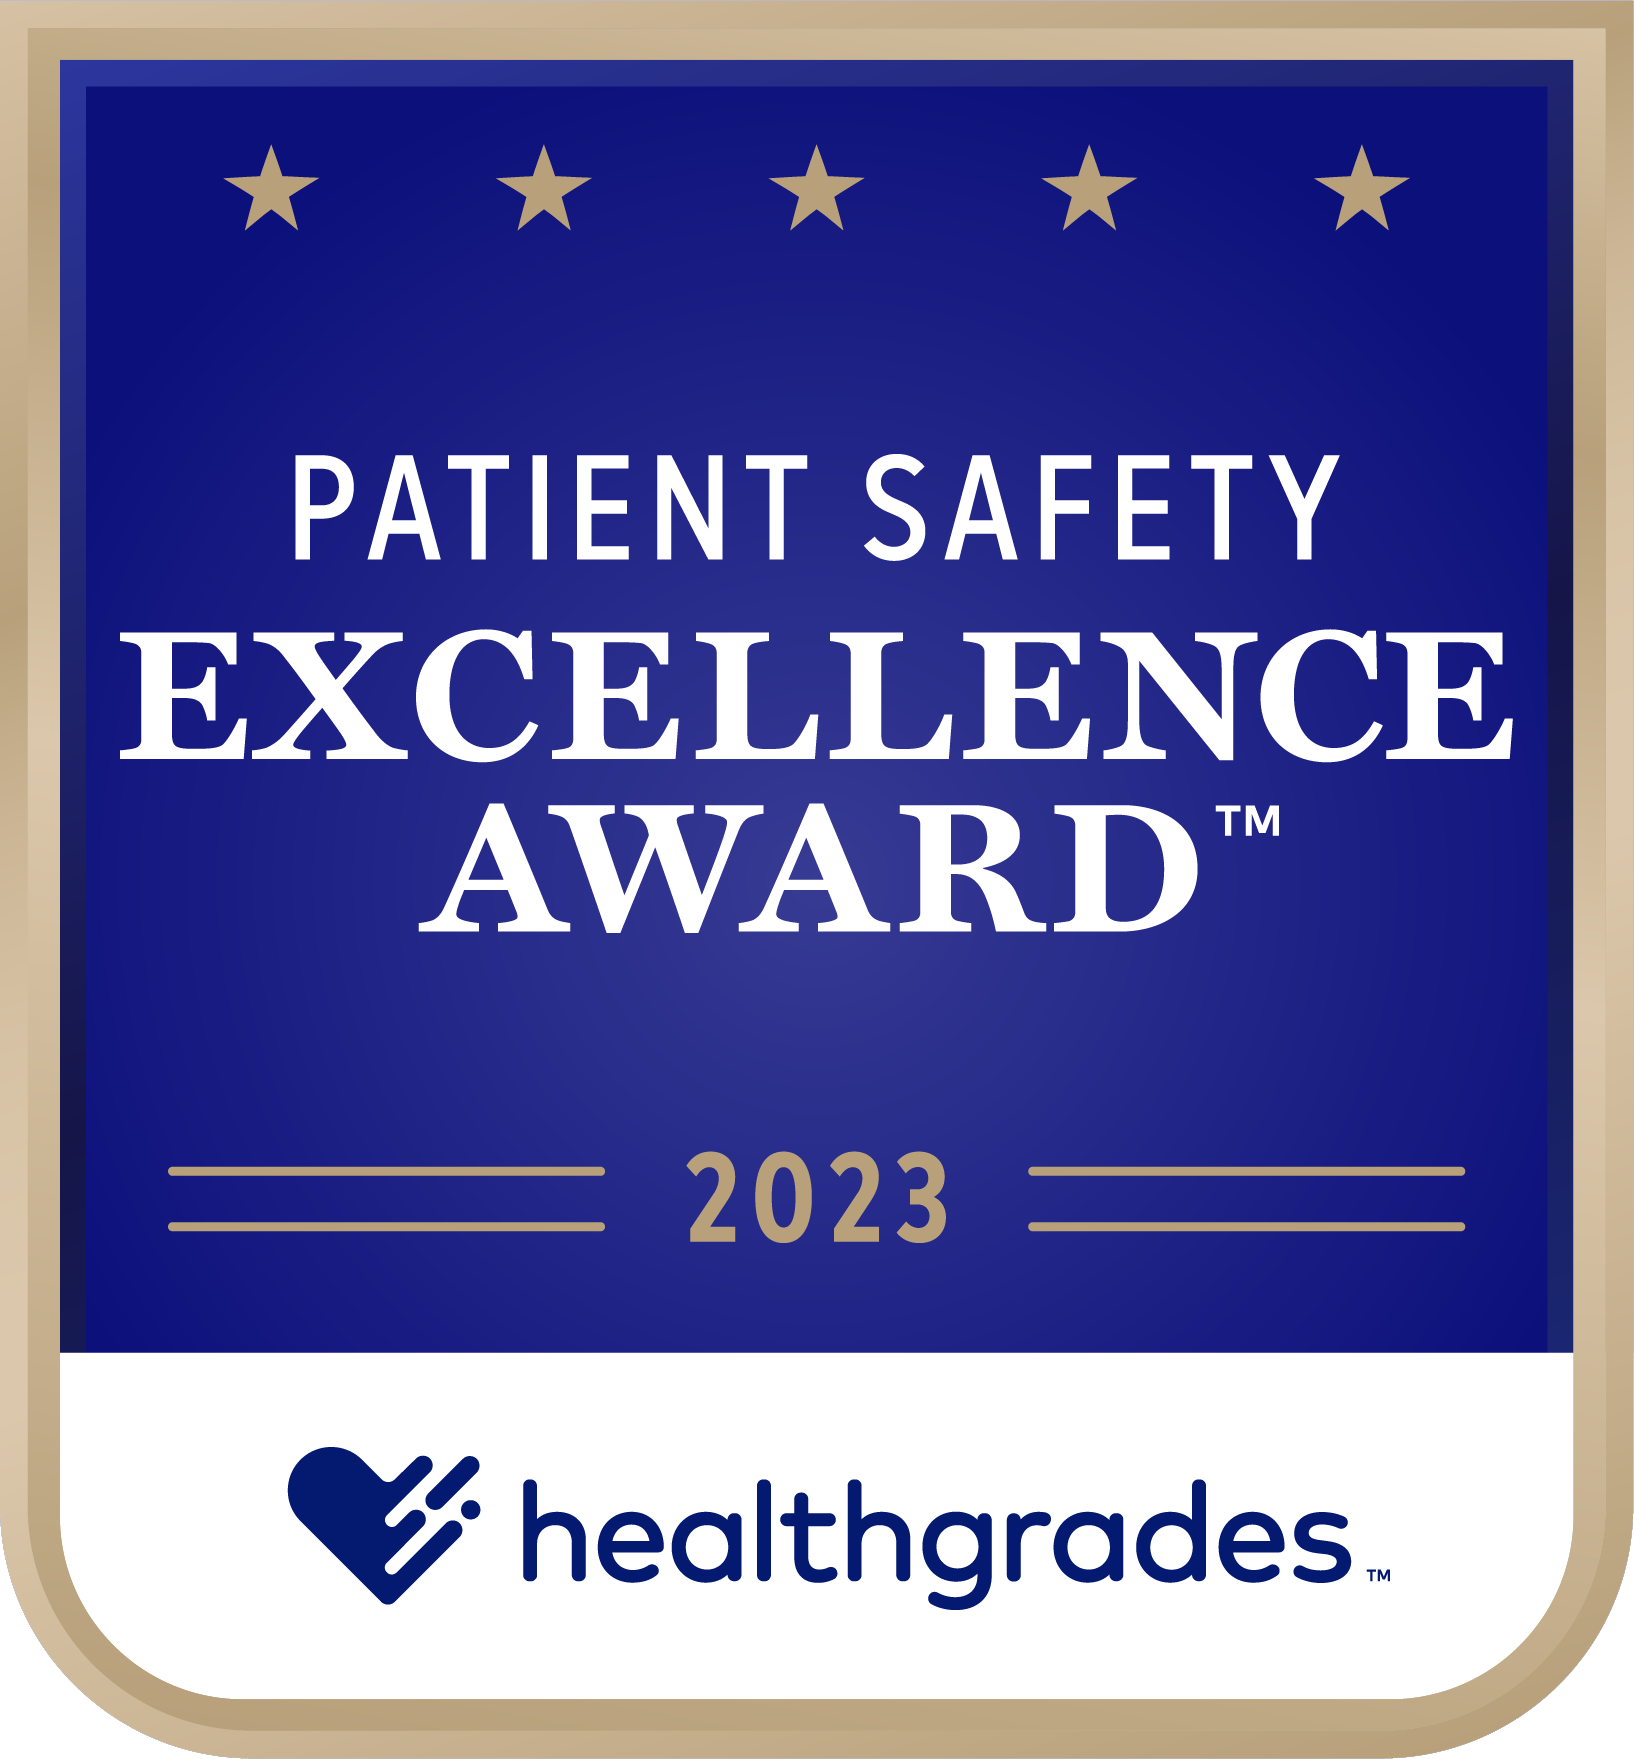 Patient Safety Award Image